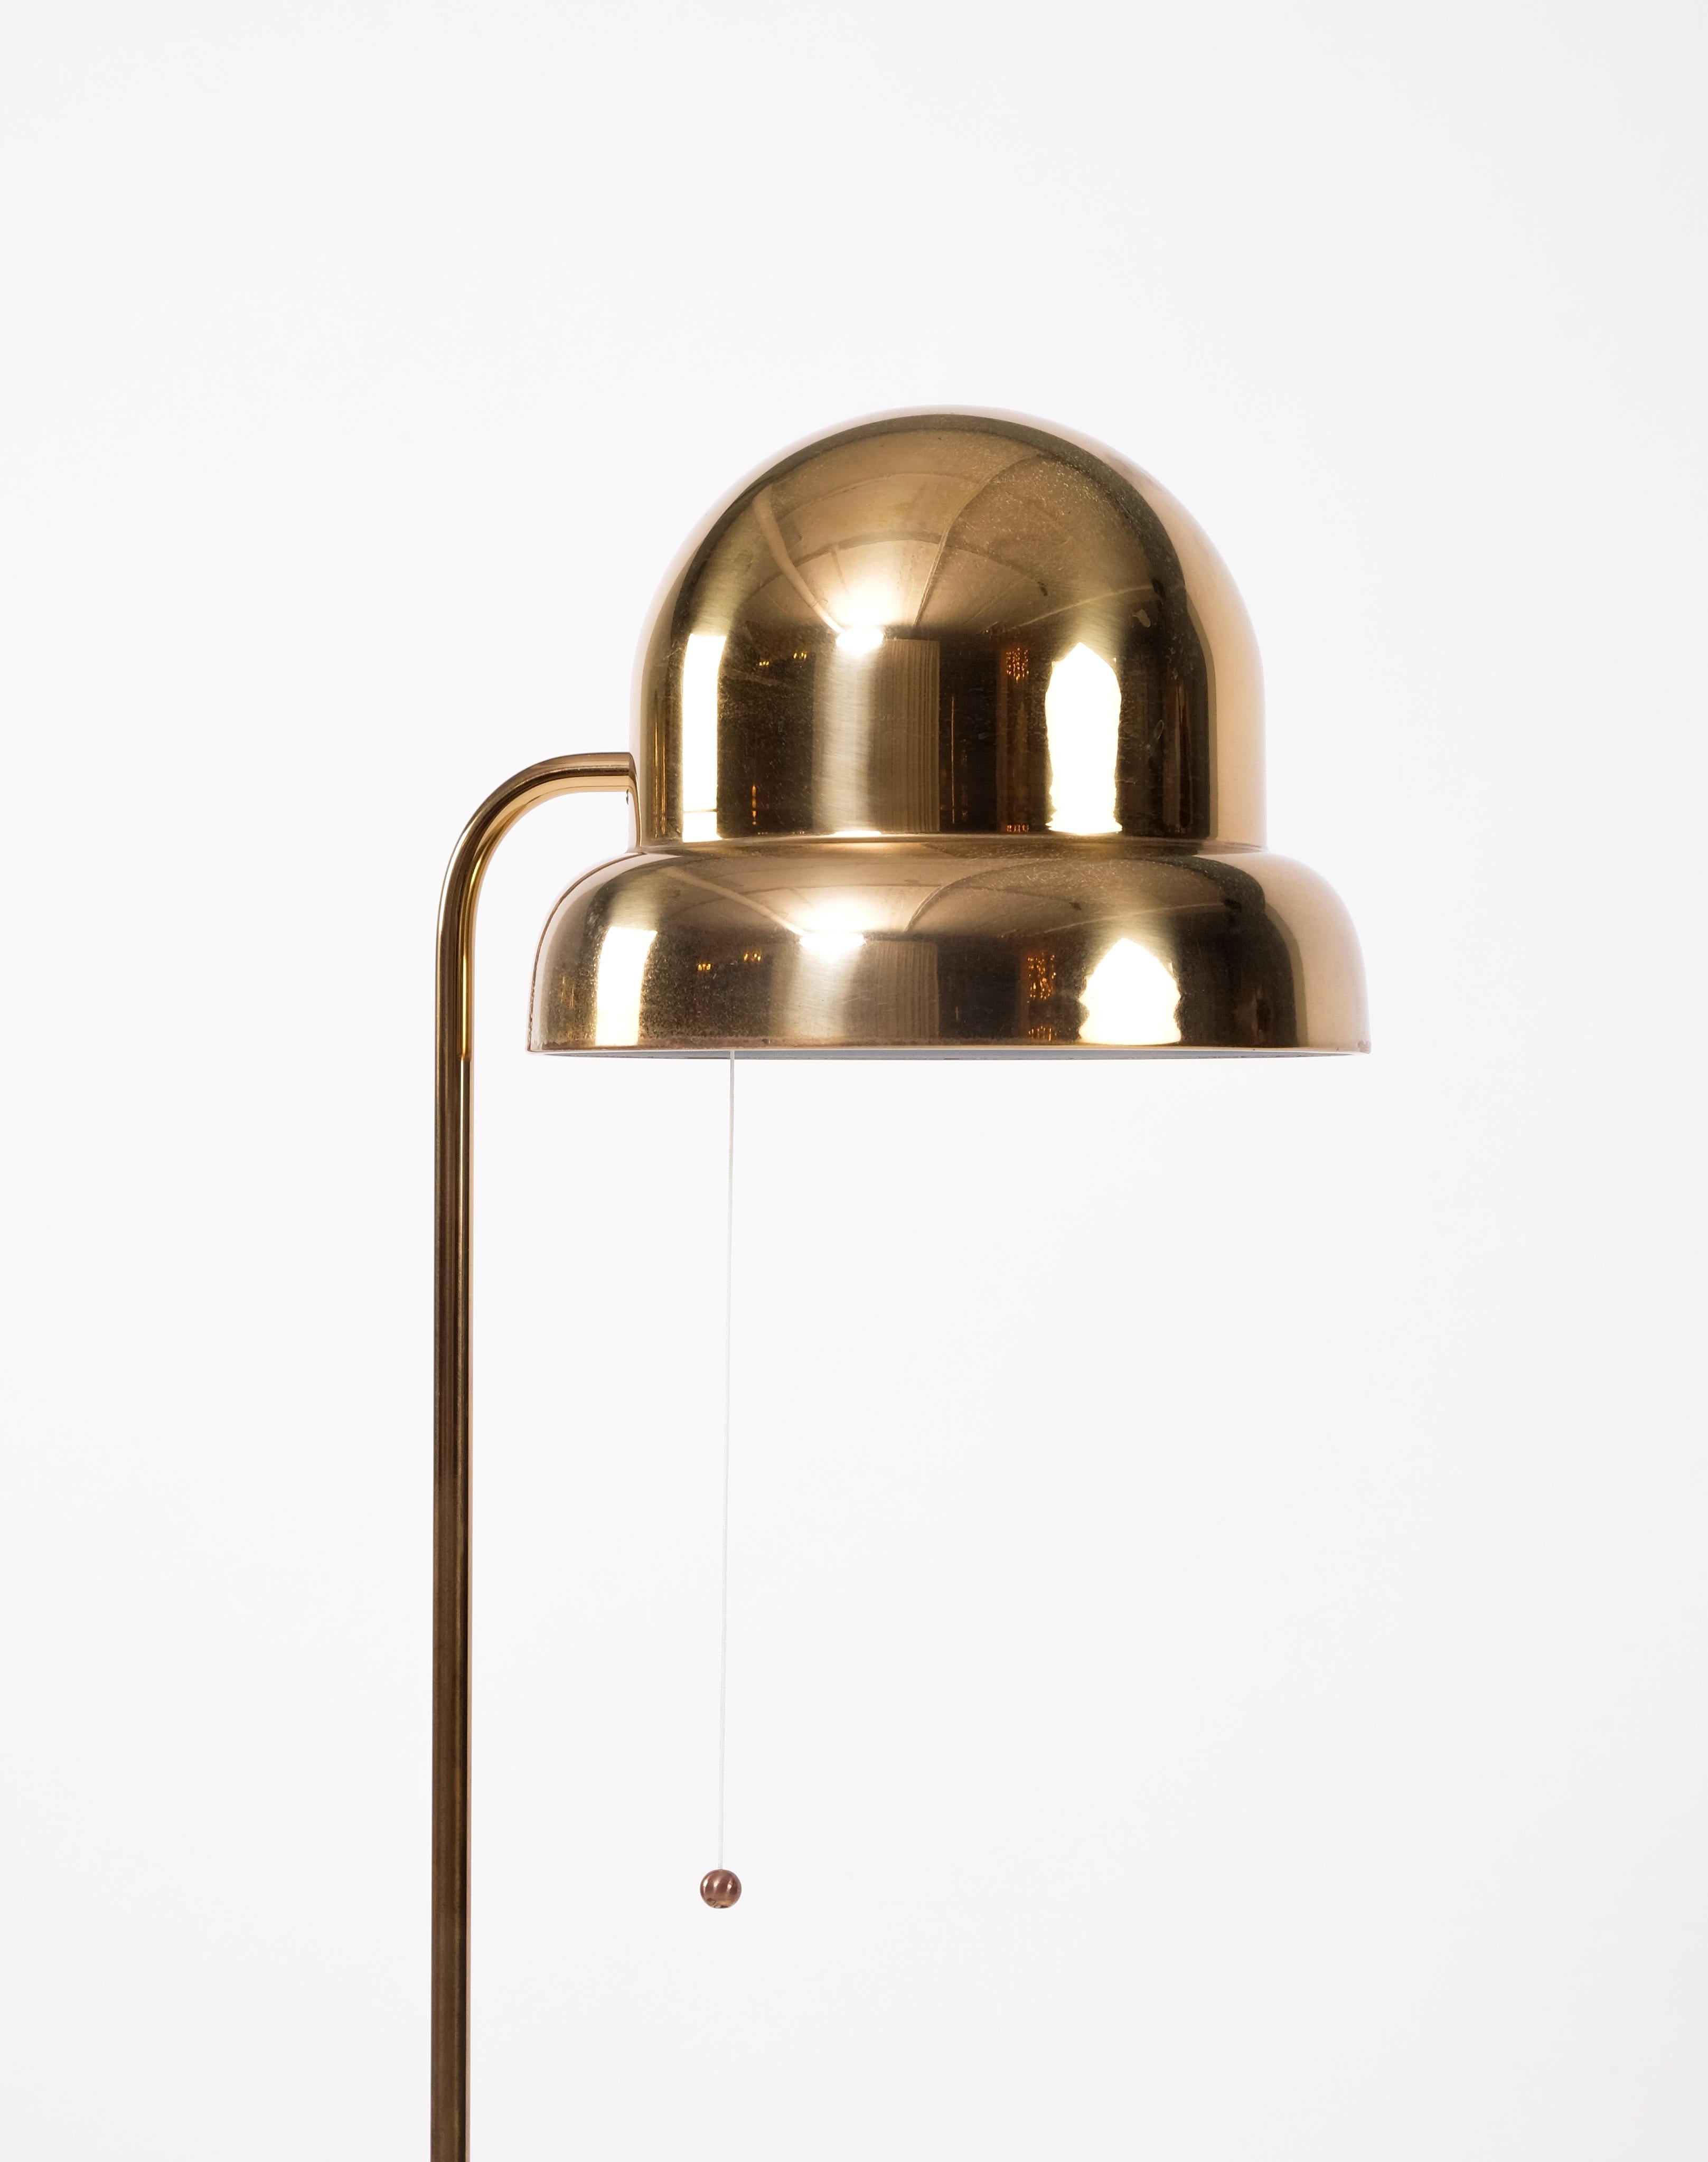 Floor lamp in brass, model G-090 manufactured by Bergboms, Sweden, 1960s.
New wiring.
Measures: Height 110 cm.